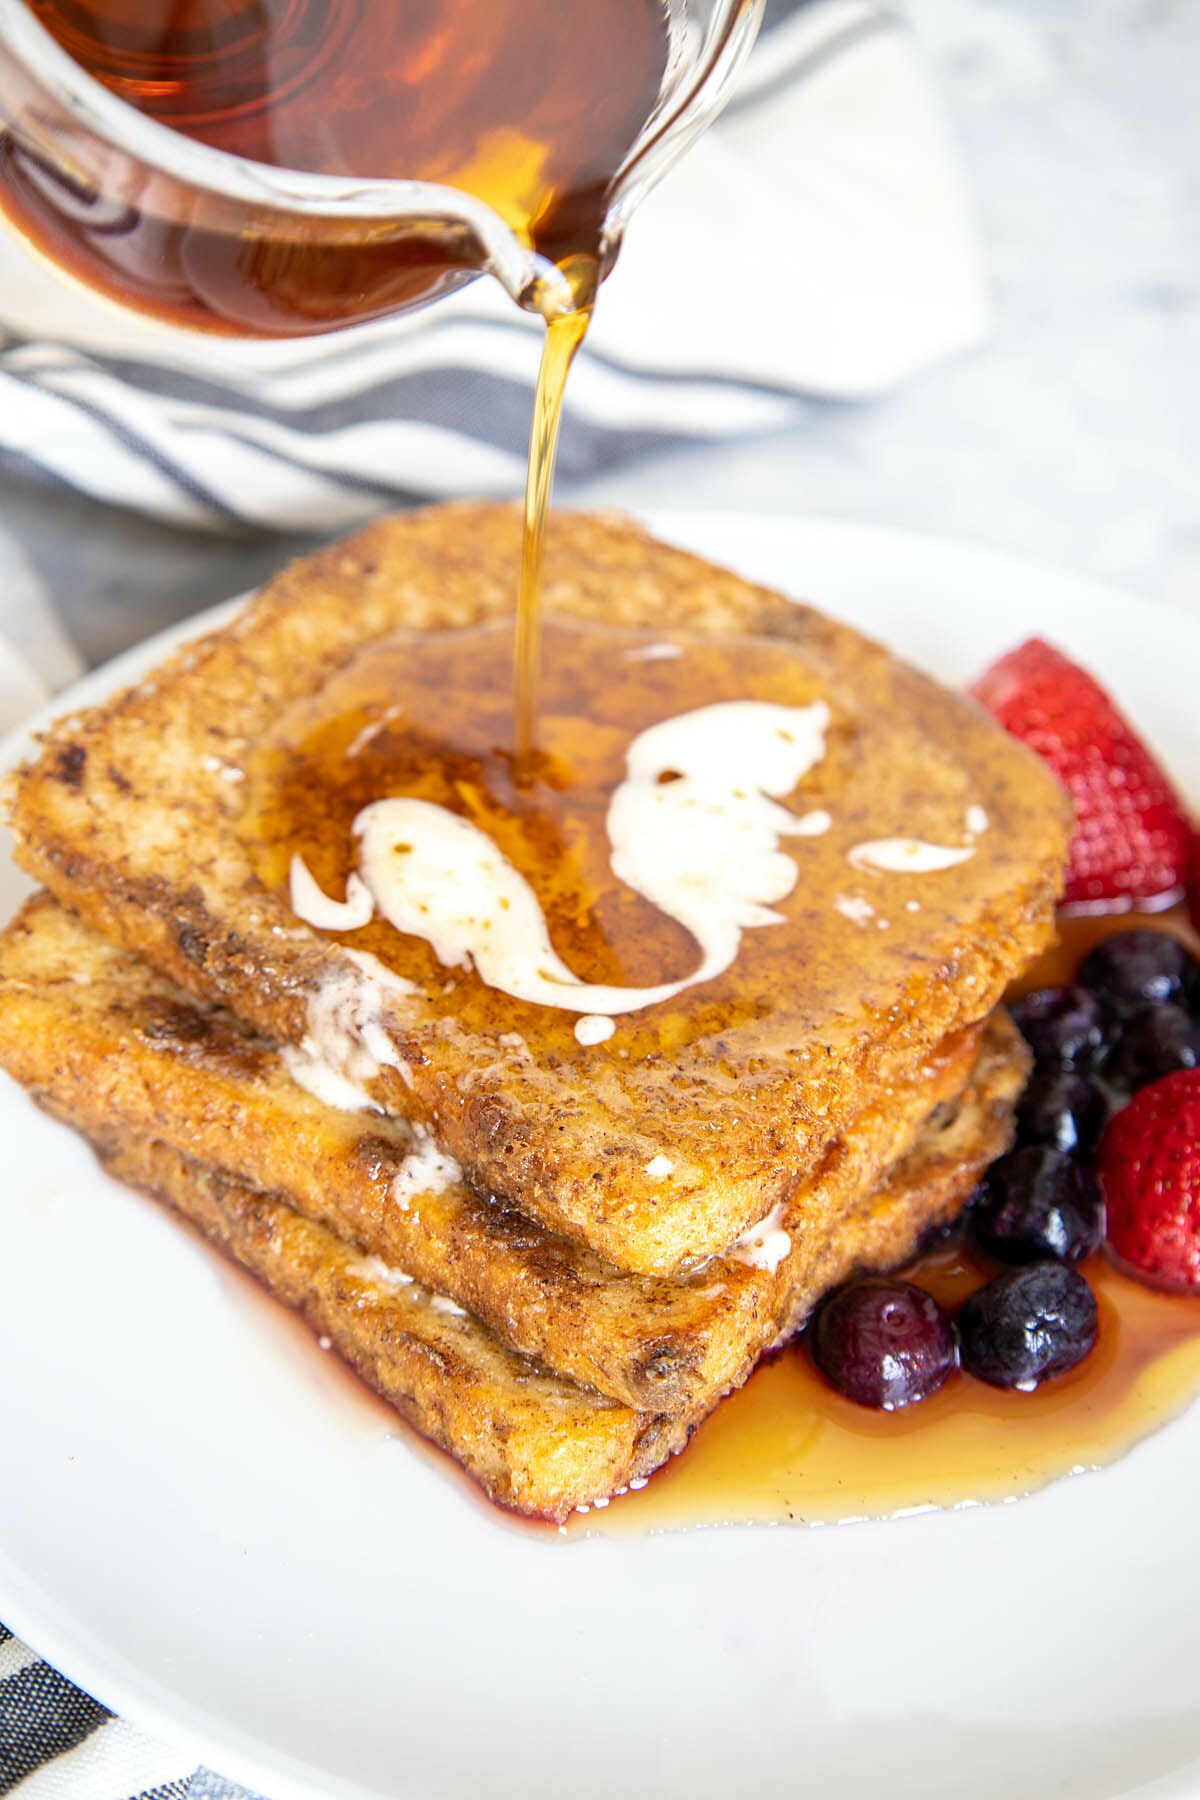 Maple syrup being poured on Vegan French Toast.